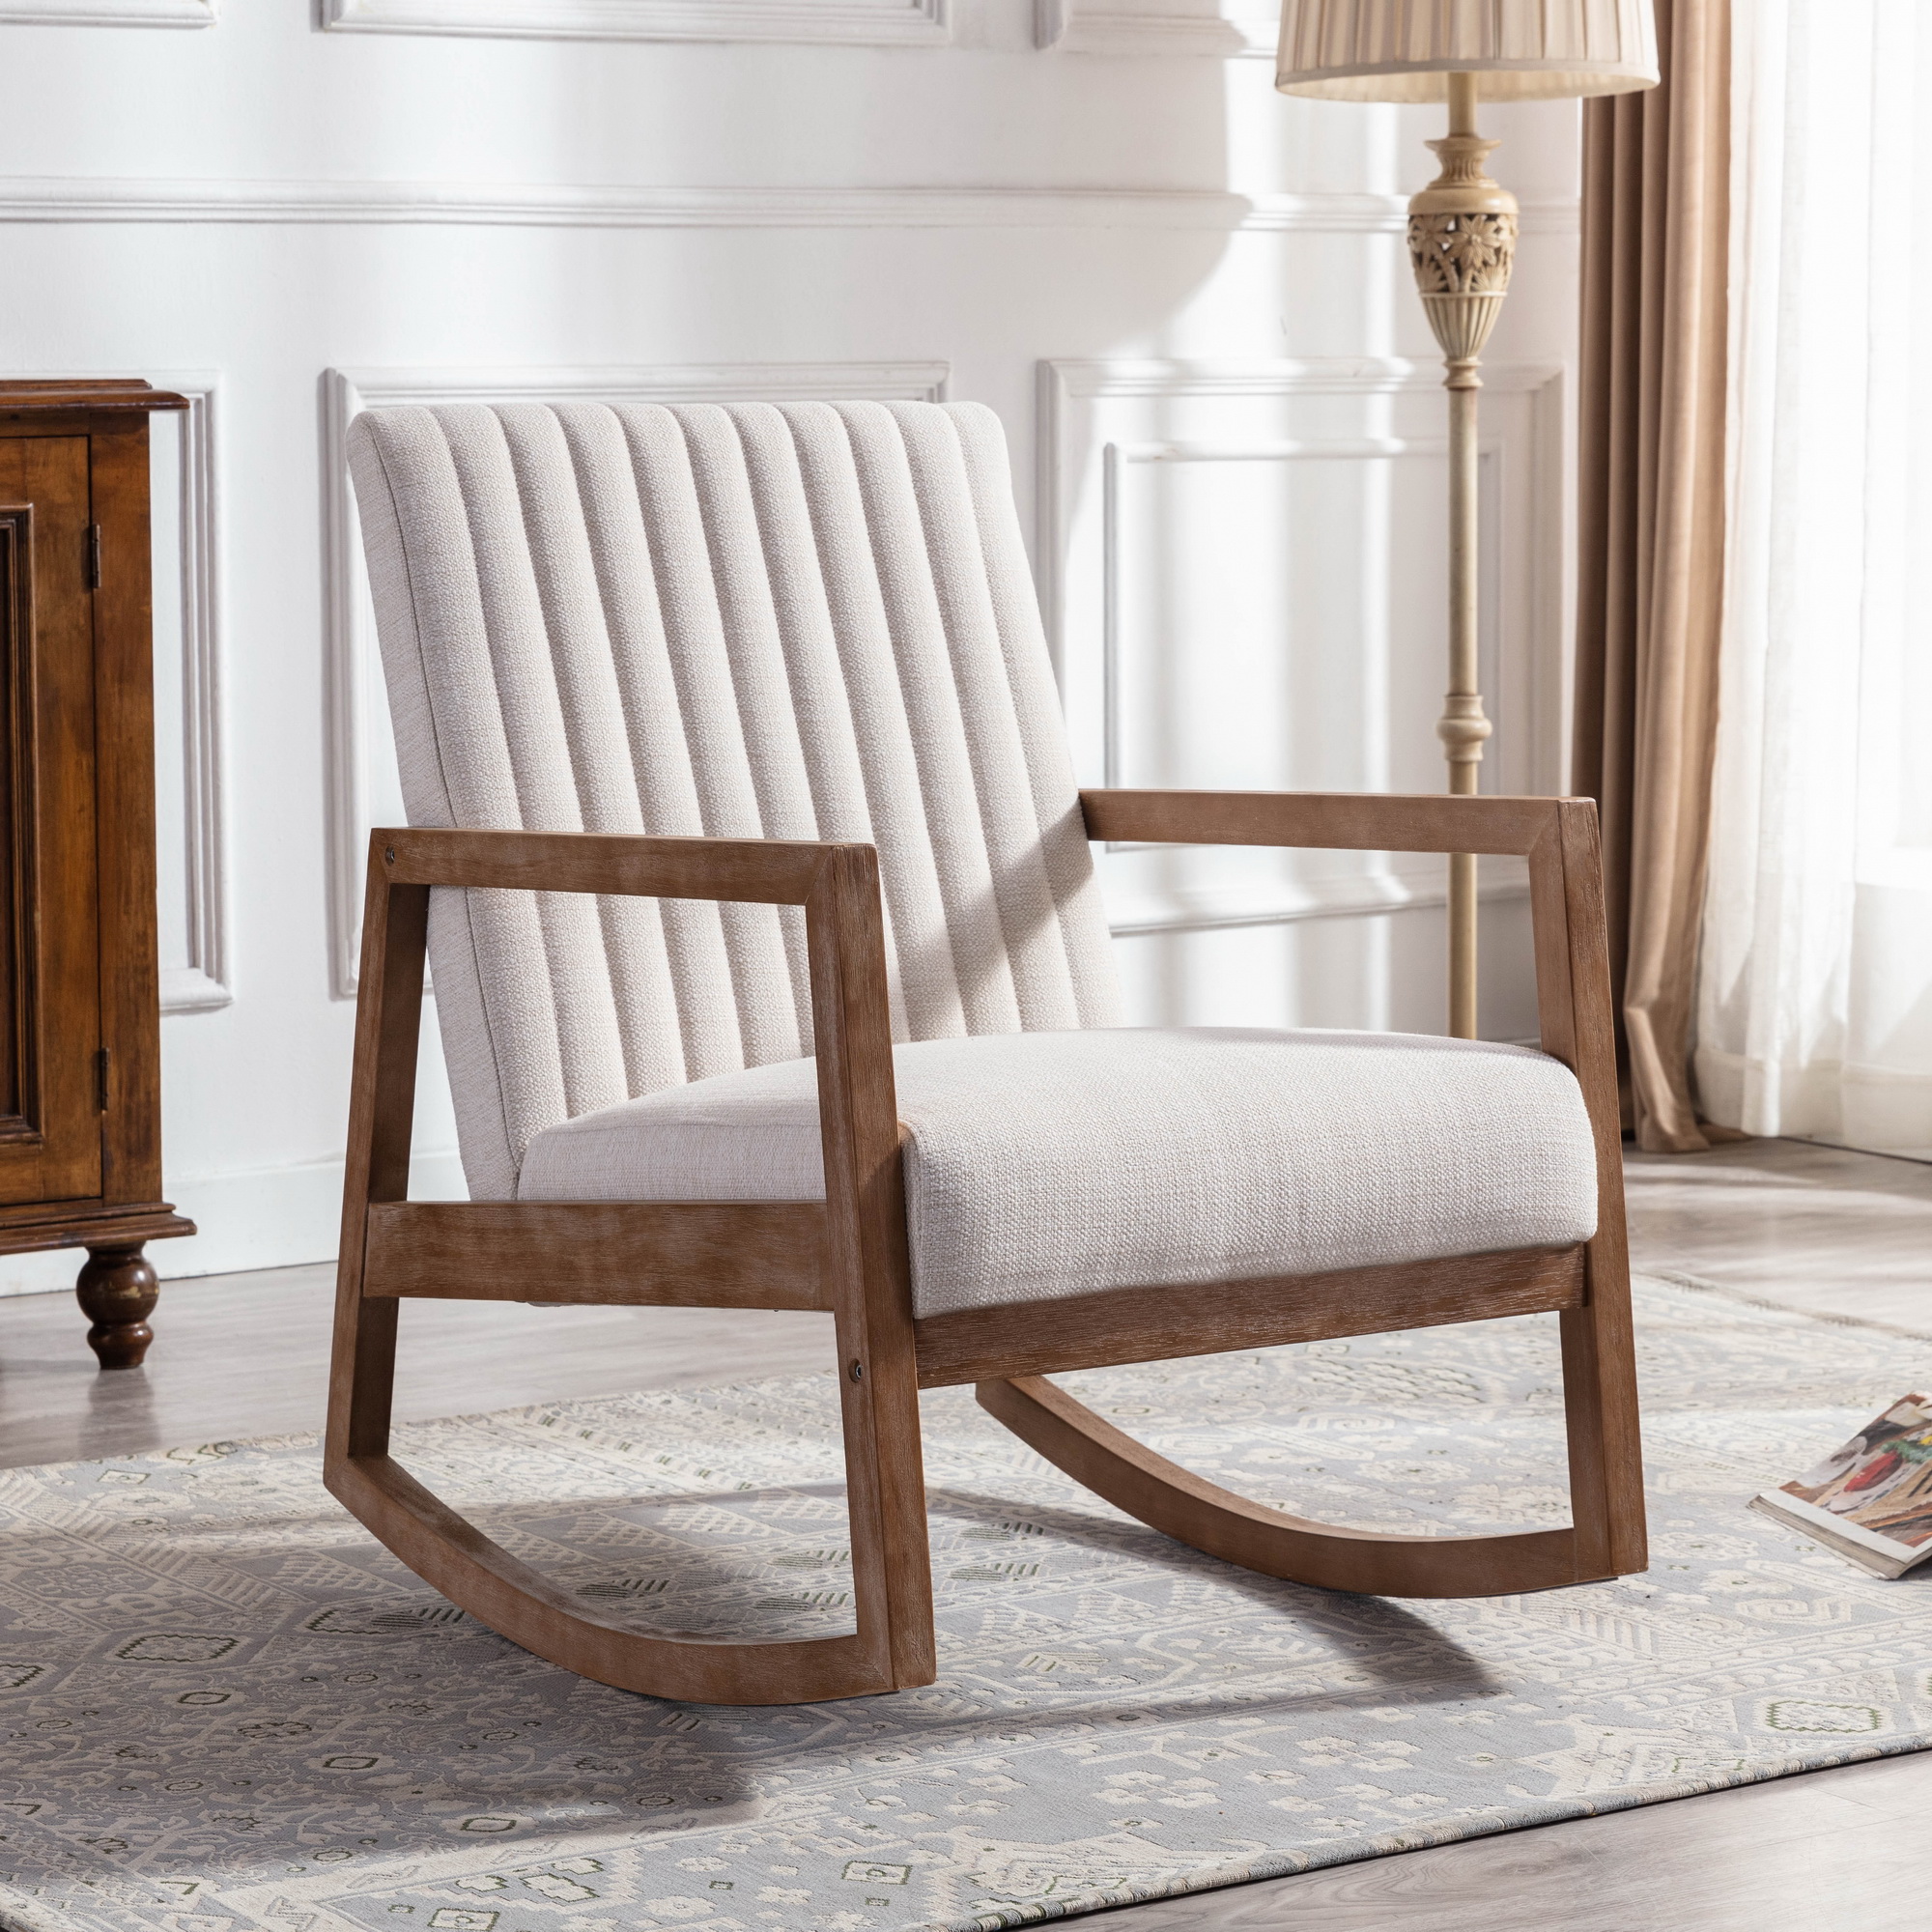 VESCASA Upholstered Rocking Chair with Channel-Tufted Back